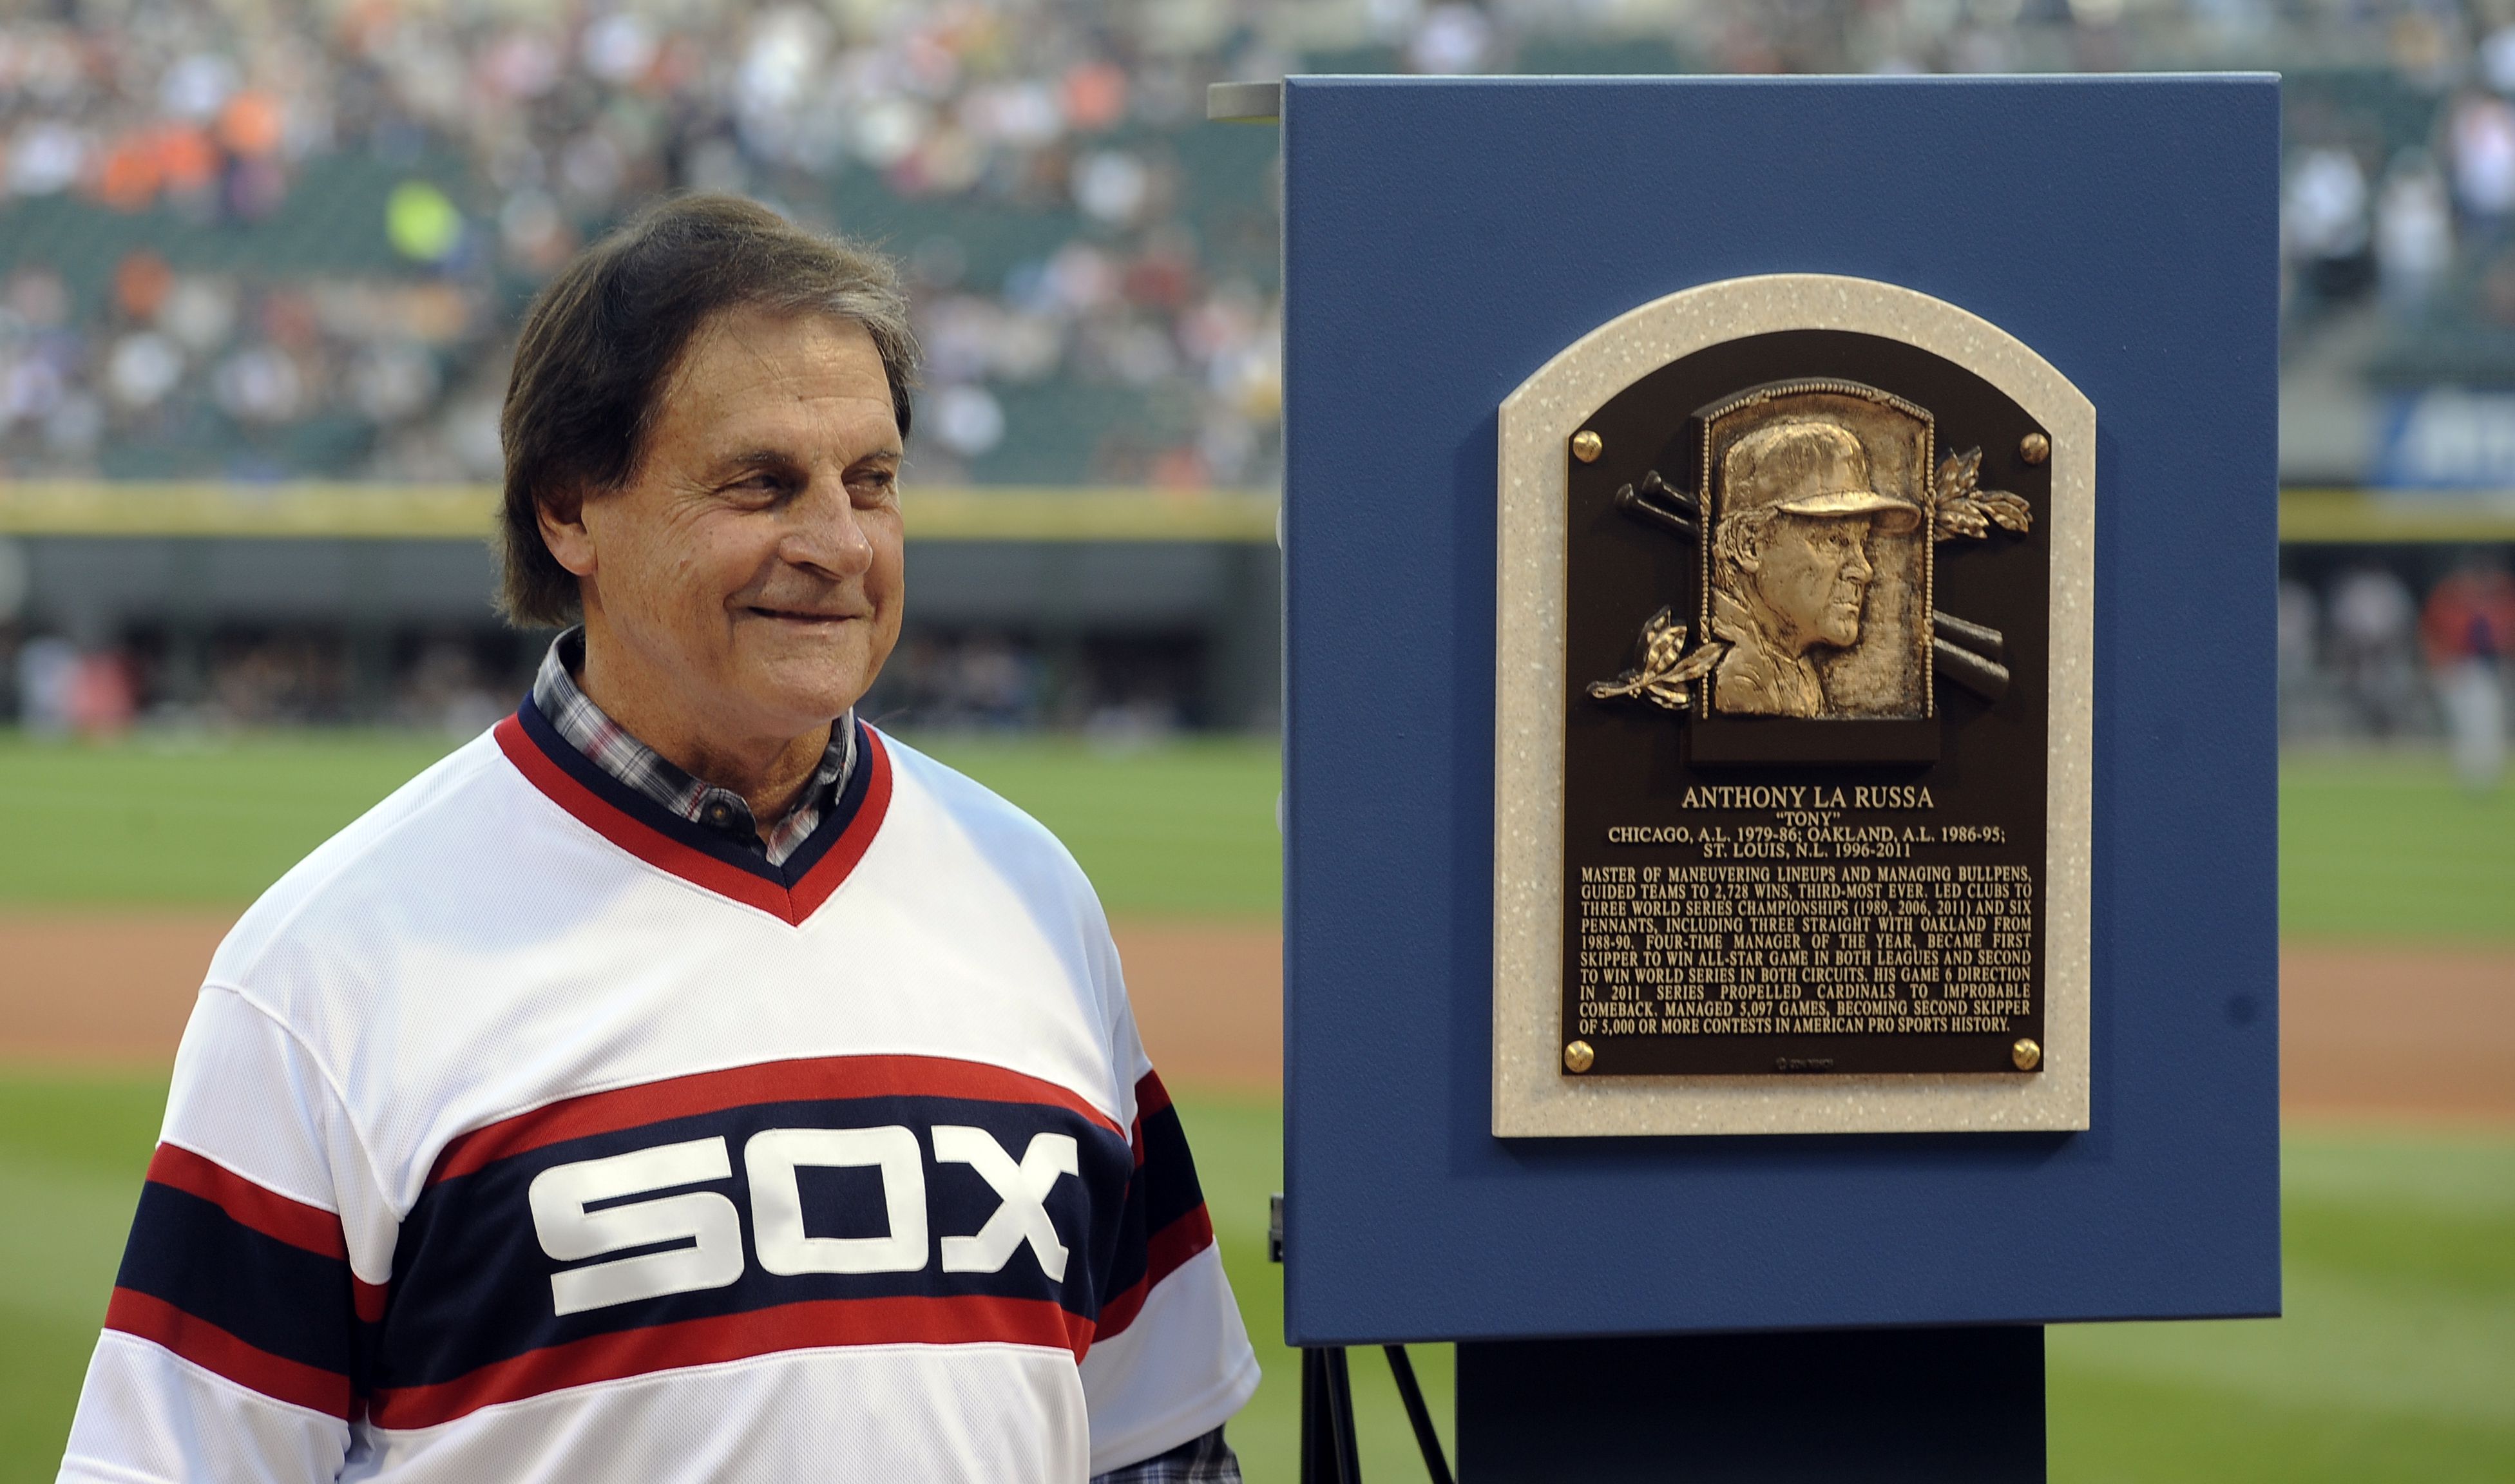 Quick hit: Collector Stephen K. wanted a White Sox red pinstripe